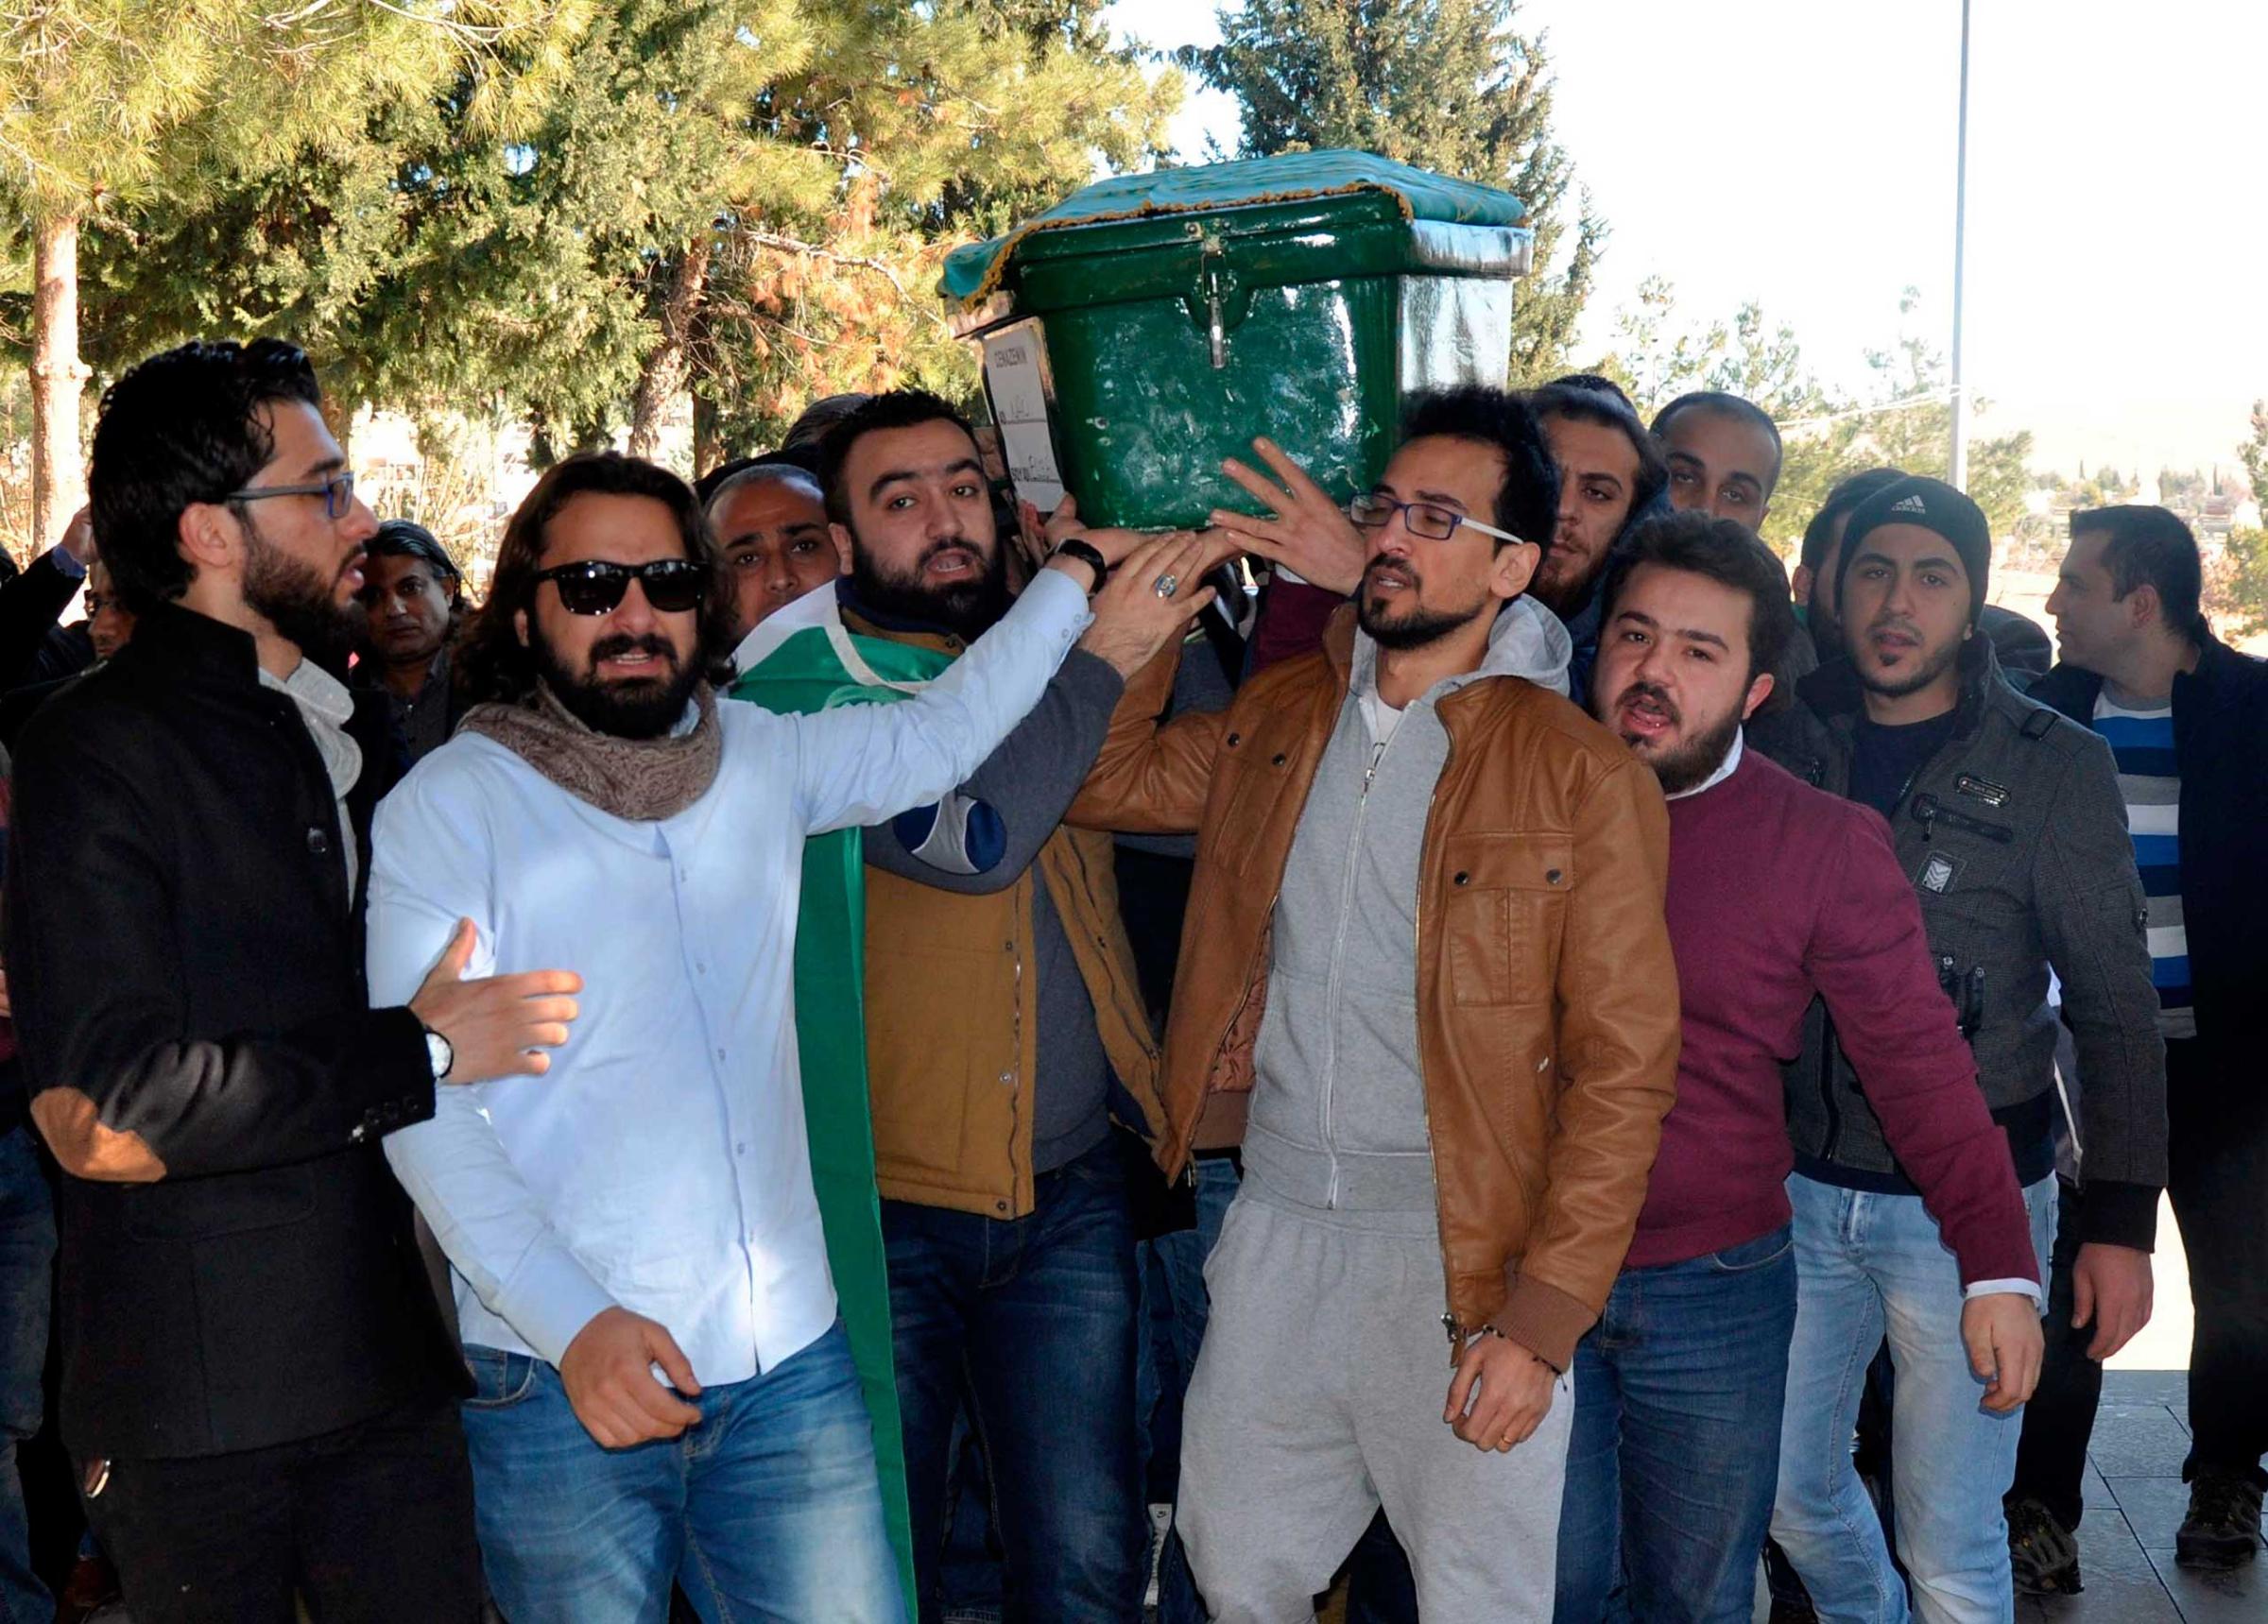 Men carry the coffin of filmmaker Naji Jerf, a citizen journalist with the anti-ISIS activist group Raqqa is Being Slaughtered Silently, who was killed Dec. 27 in Gaziantep, Turkey, on Dec. 28, 2015.